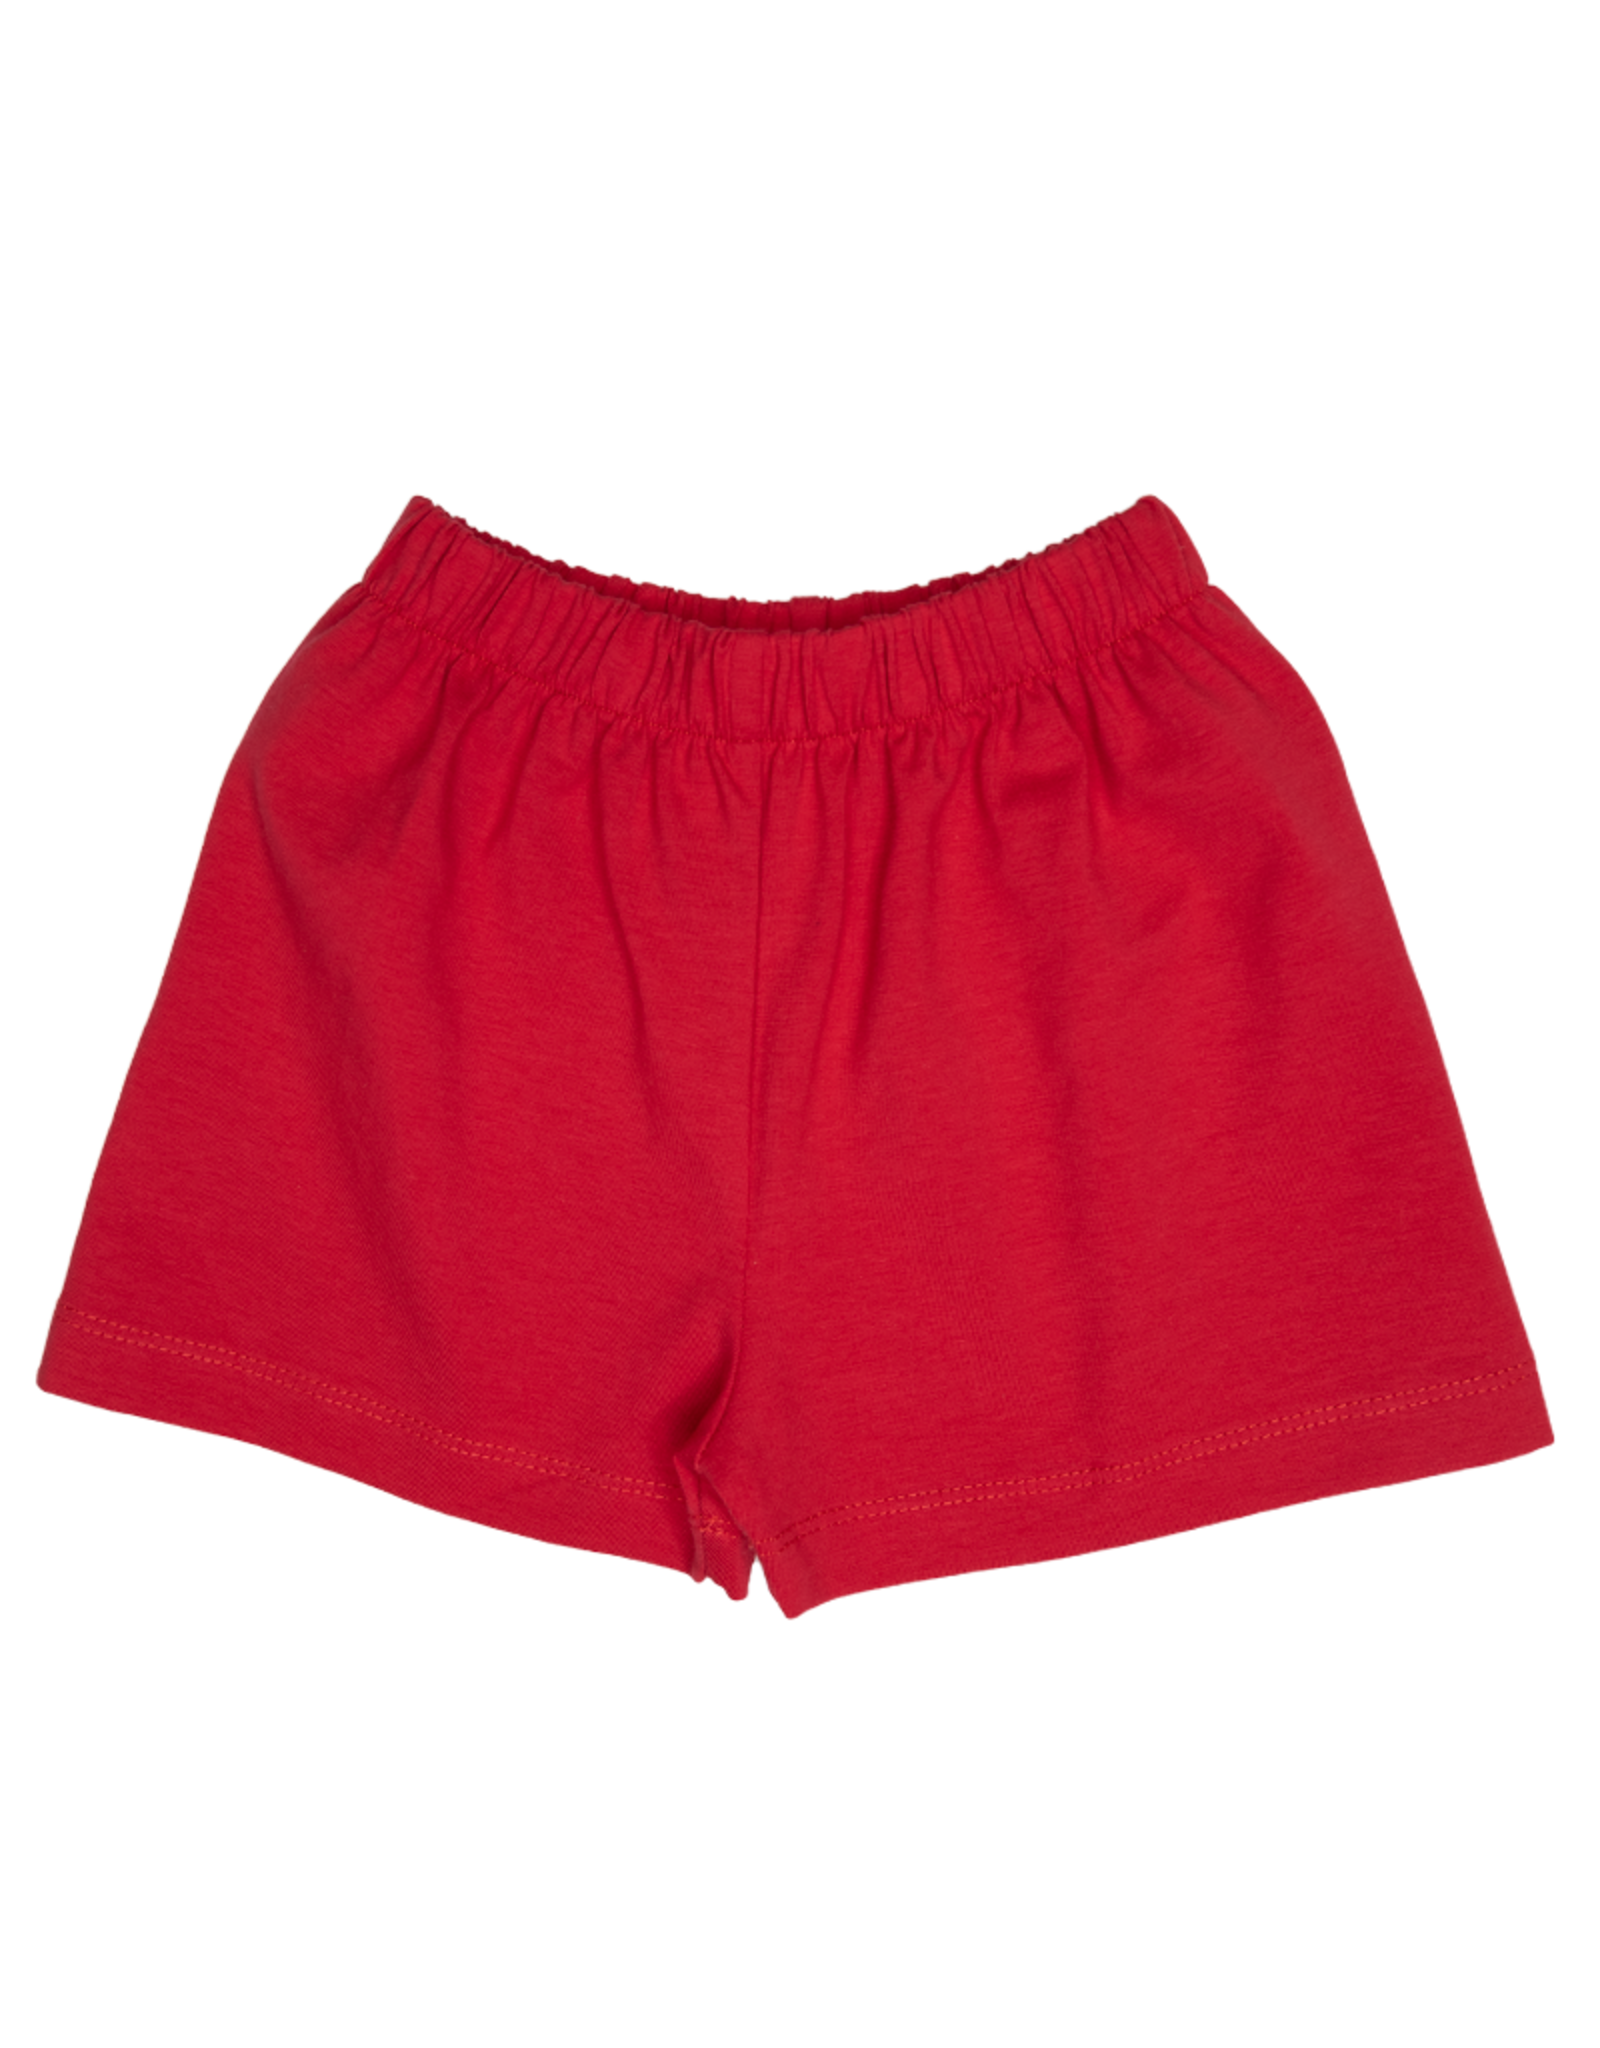 Three Sisters 743 Red Knit Short